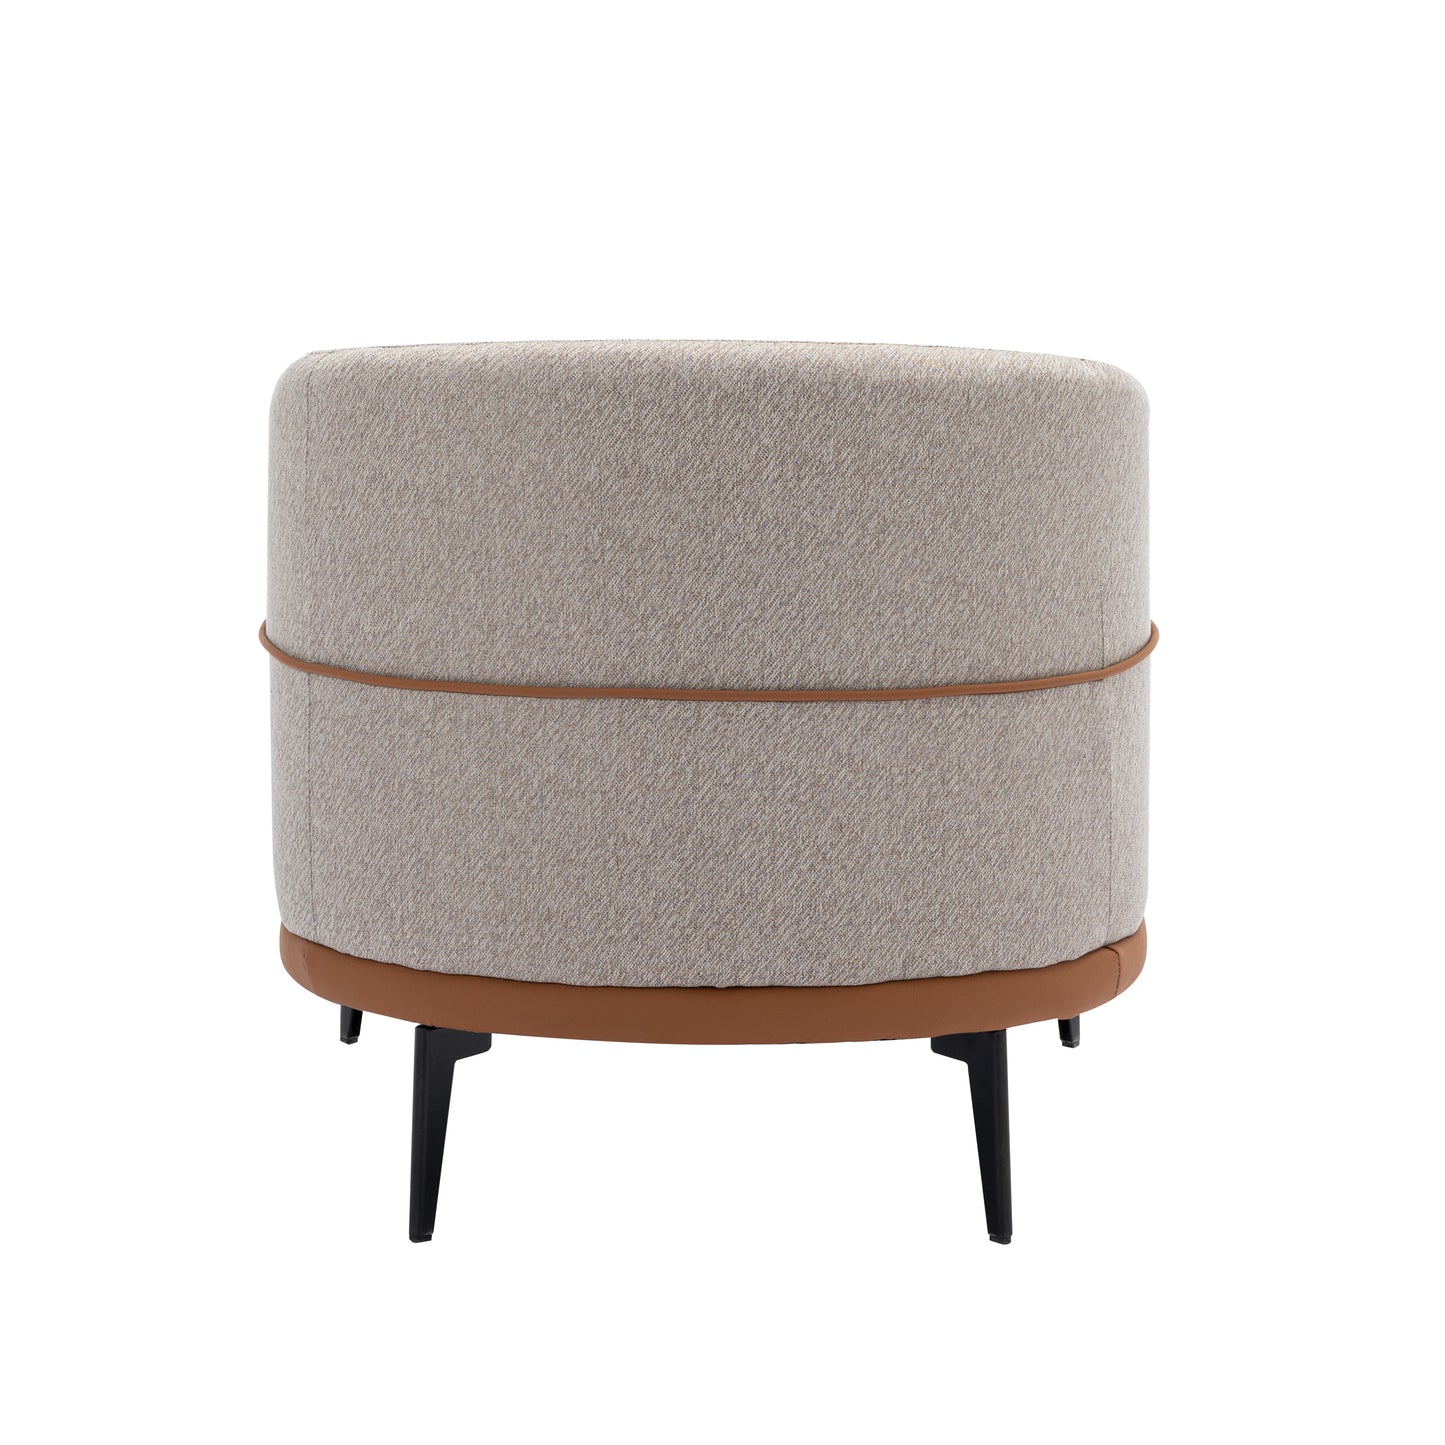 Modern Two-tone Barrel Fabric Chair, Upholstered Round Armchair for Living Room Bedroom Reading Room, Burnt Orange